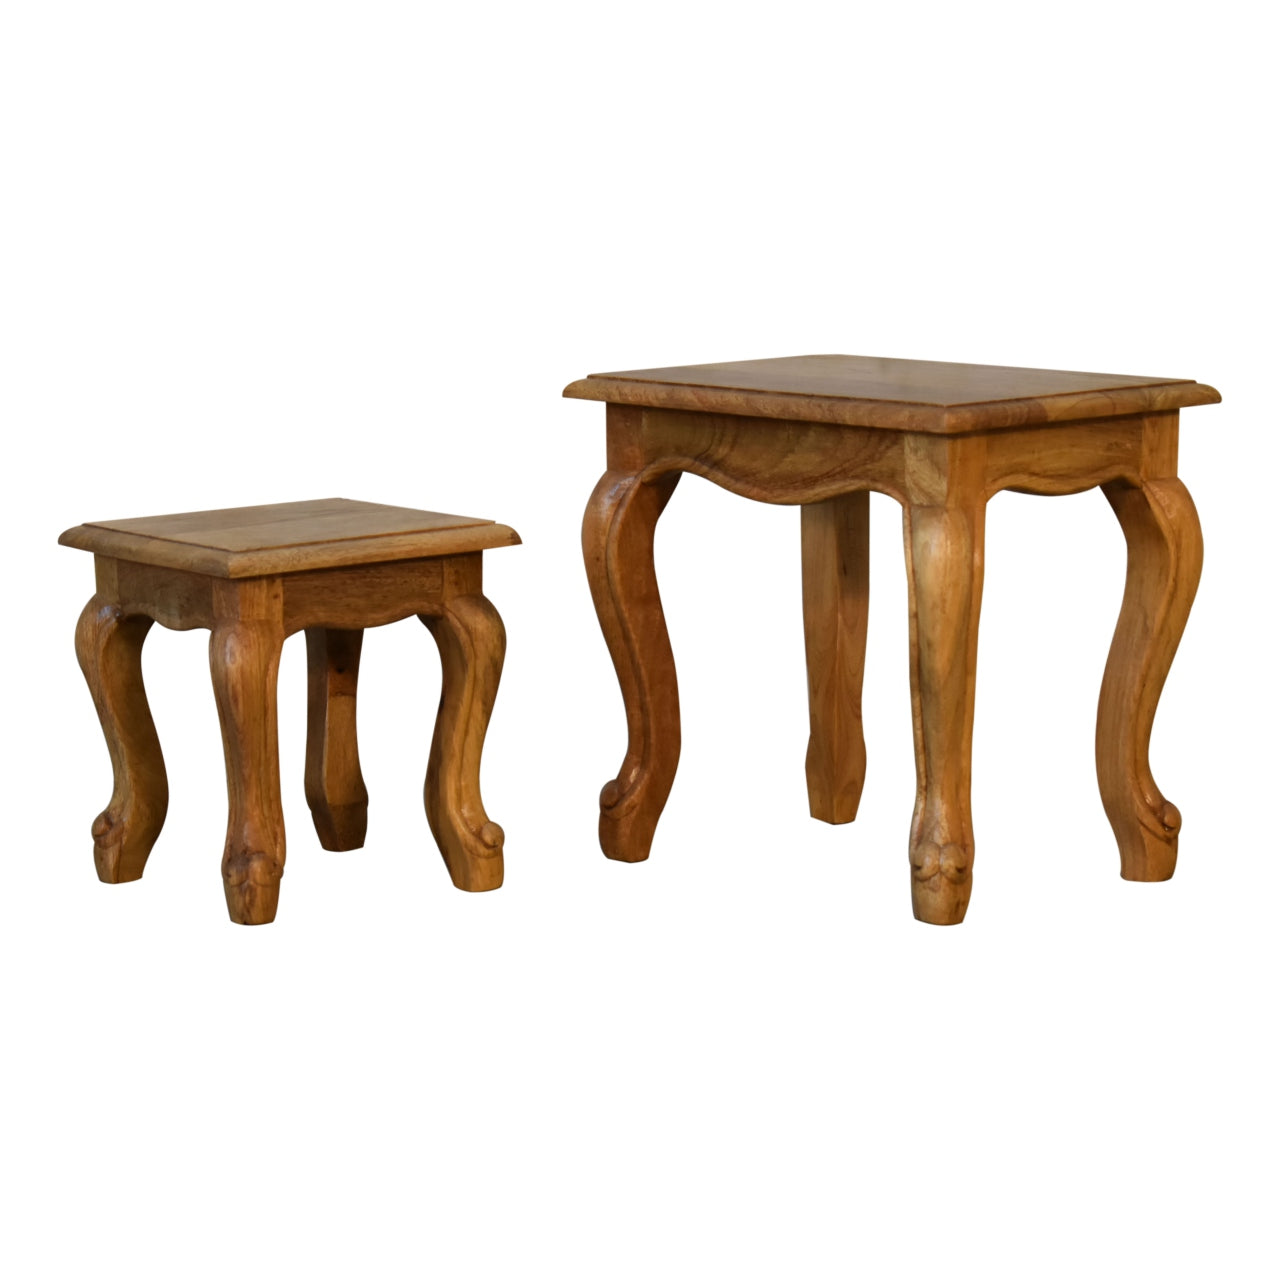 Oak-ish French Style 2 Stool Set Two Small Solid Mang Wood Tables - CasaFenix